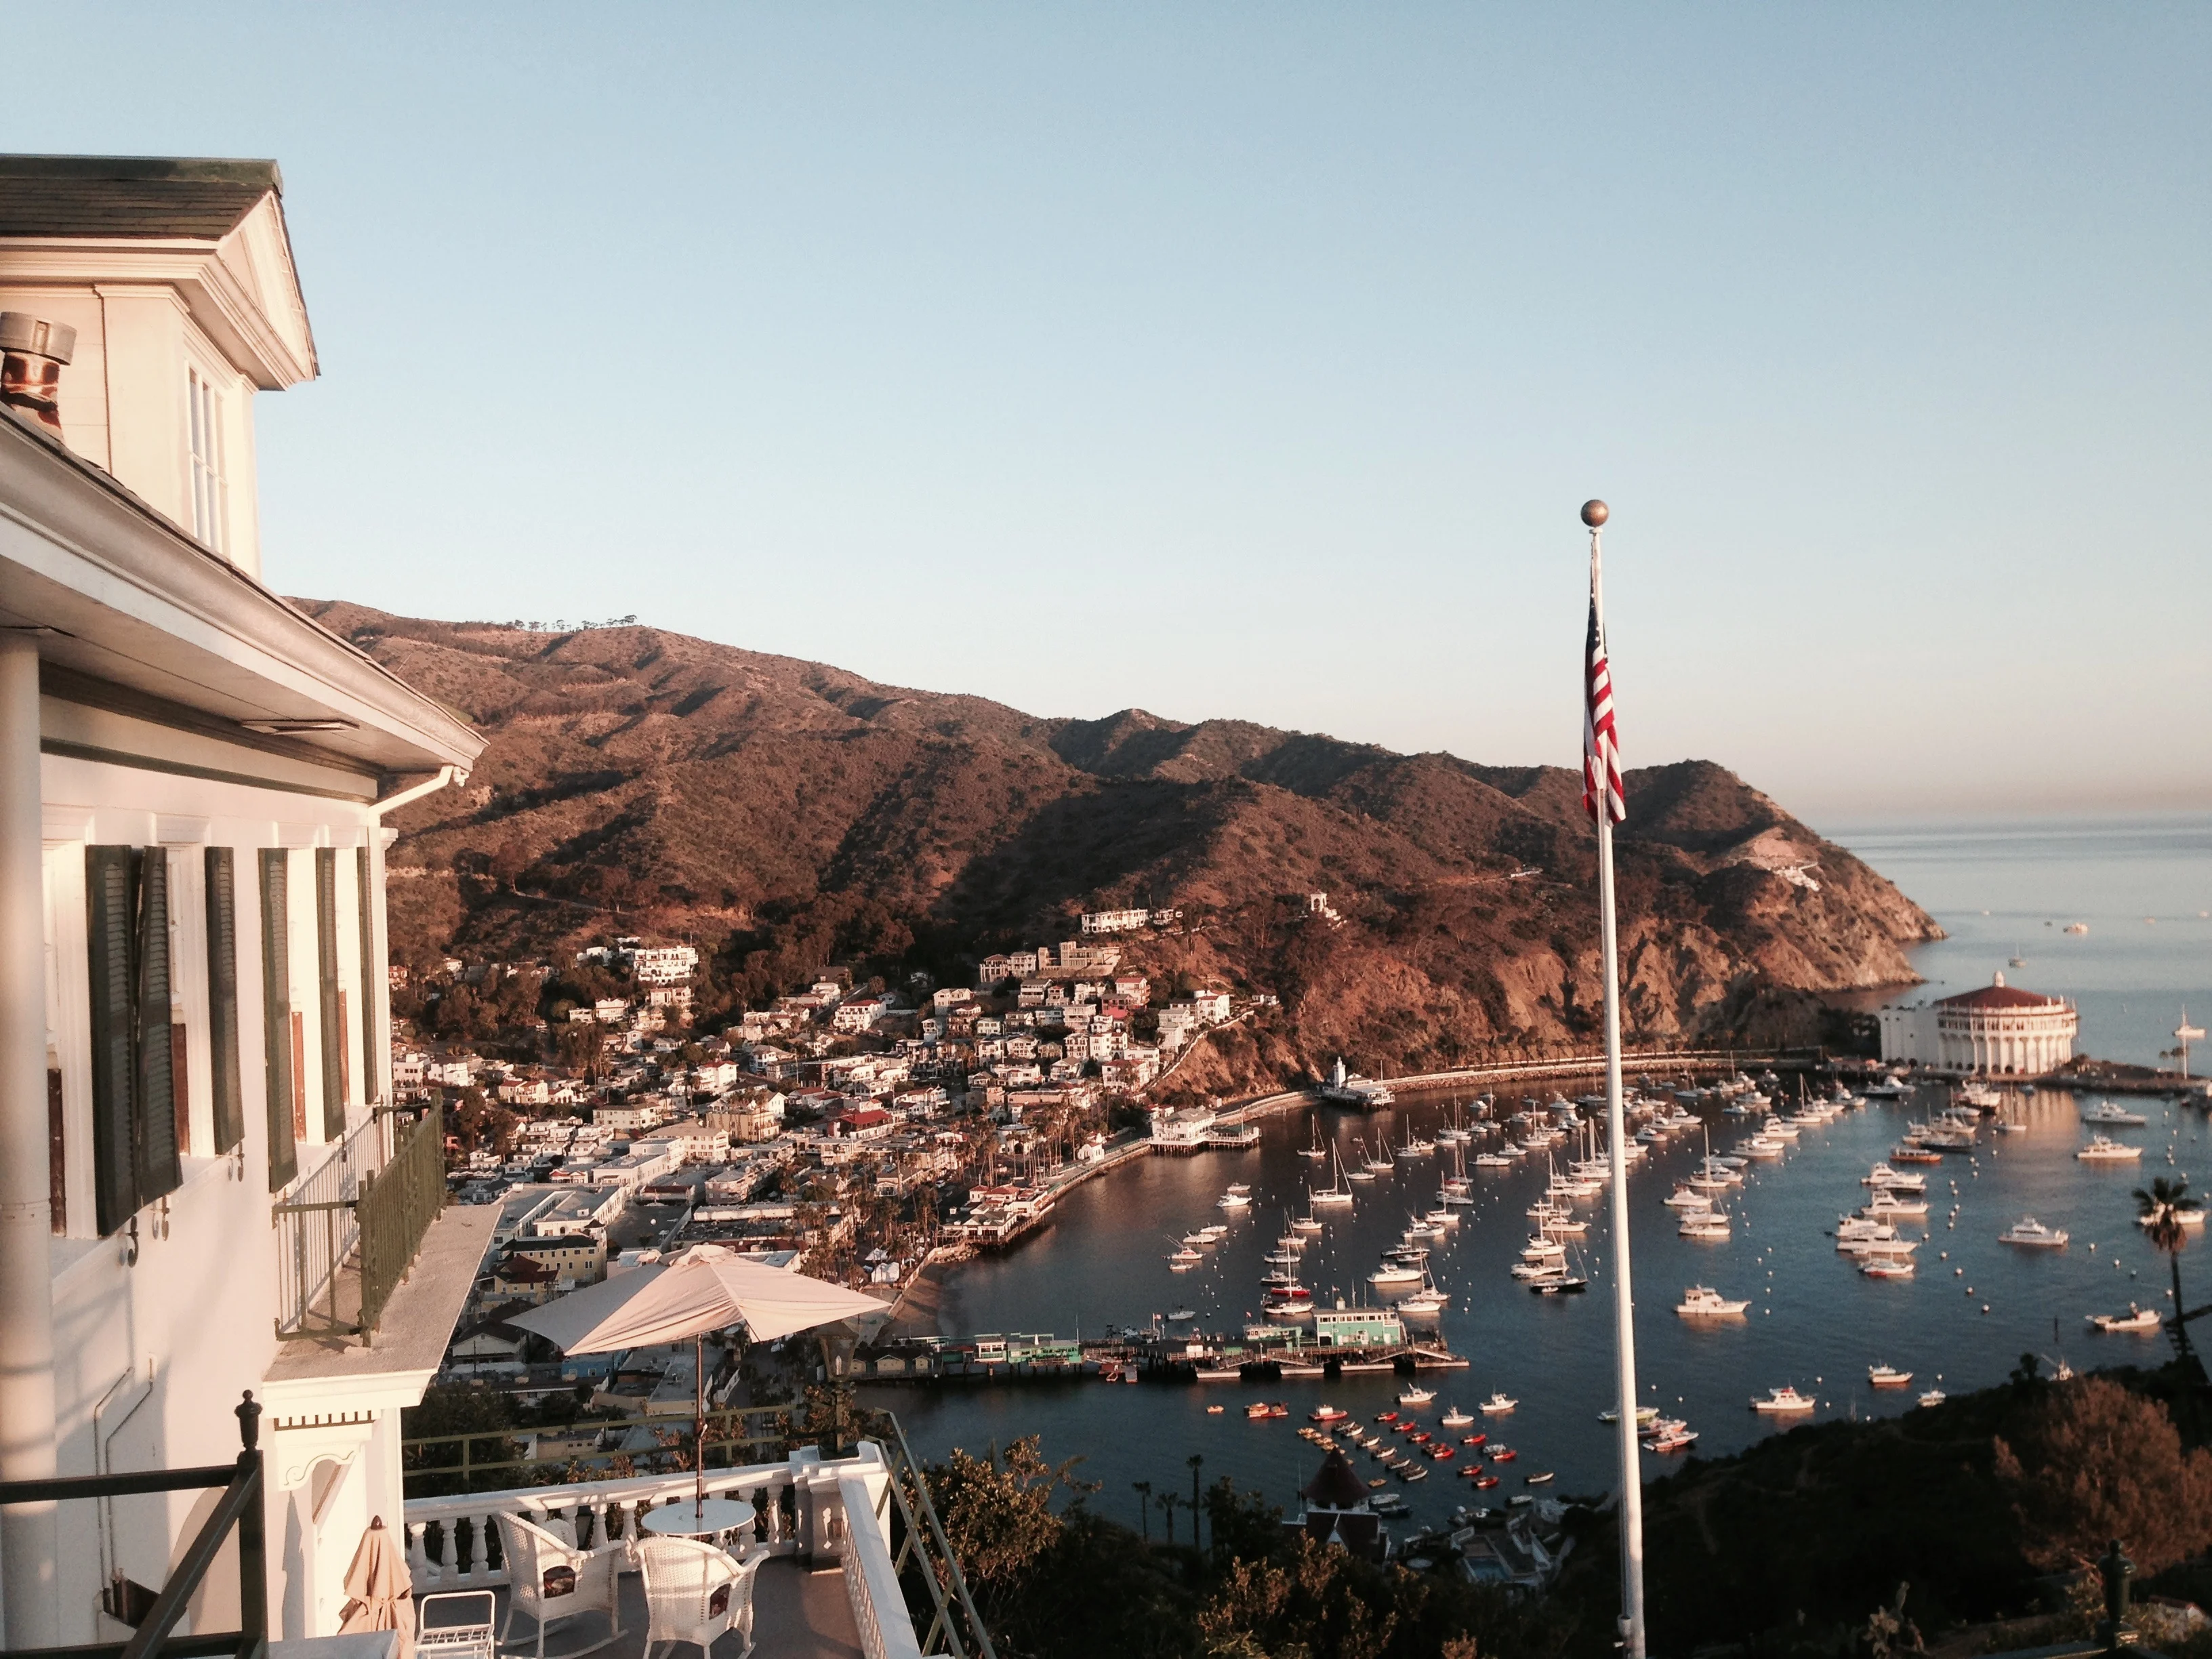 view of Avalon harbor at daybreak from Inn on Mt. Ada